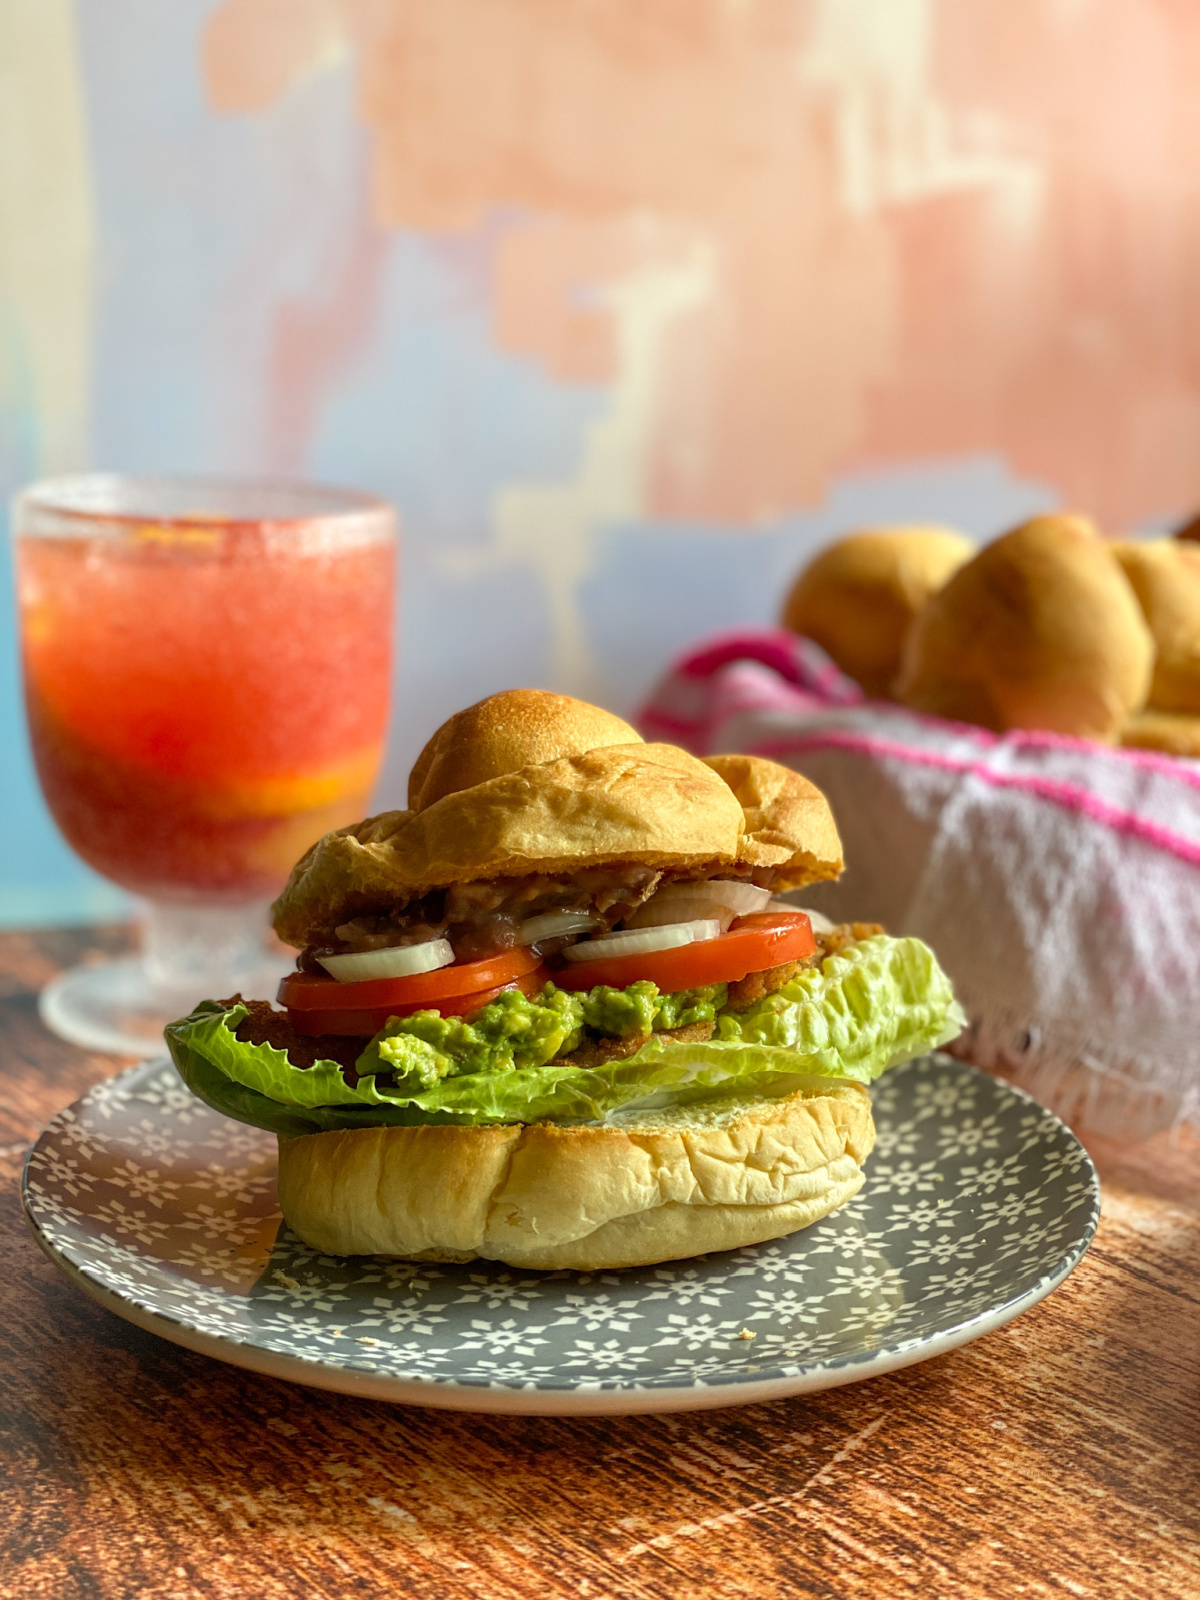 This is the Veal Milanese Sandwich Mexican-Style served on a plate paired with orange cranberry juice